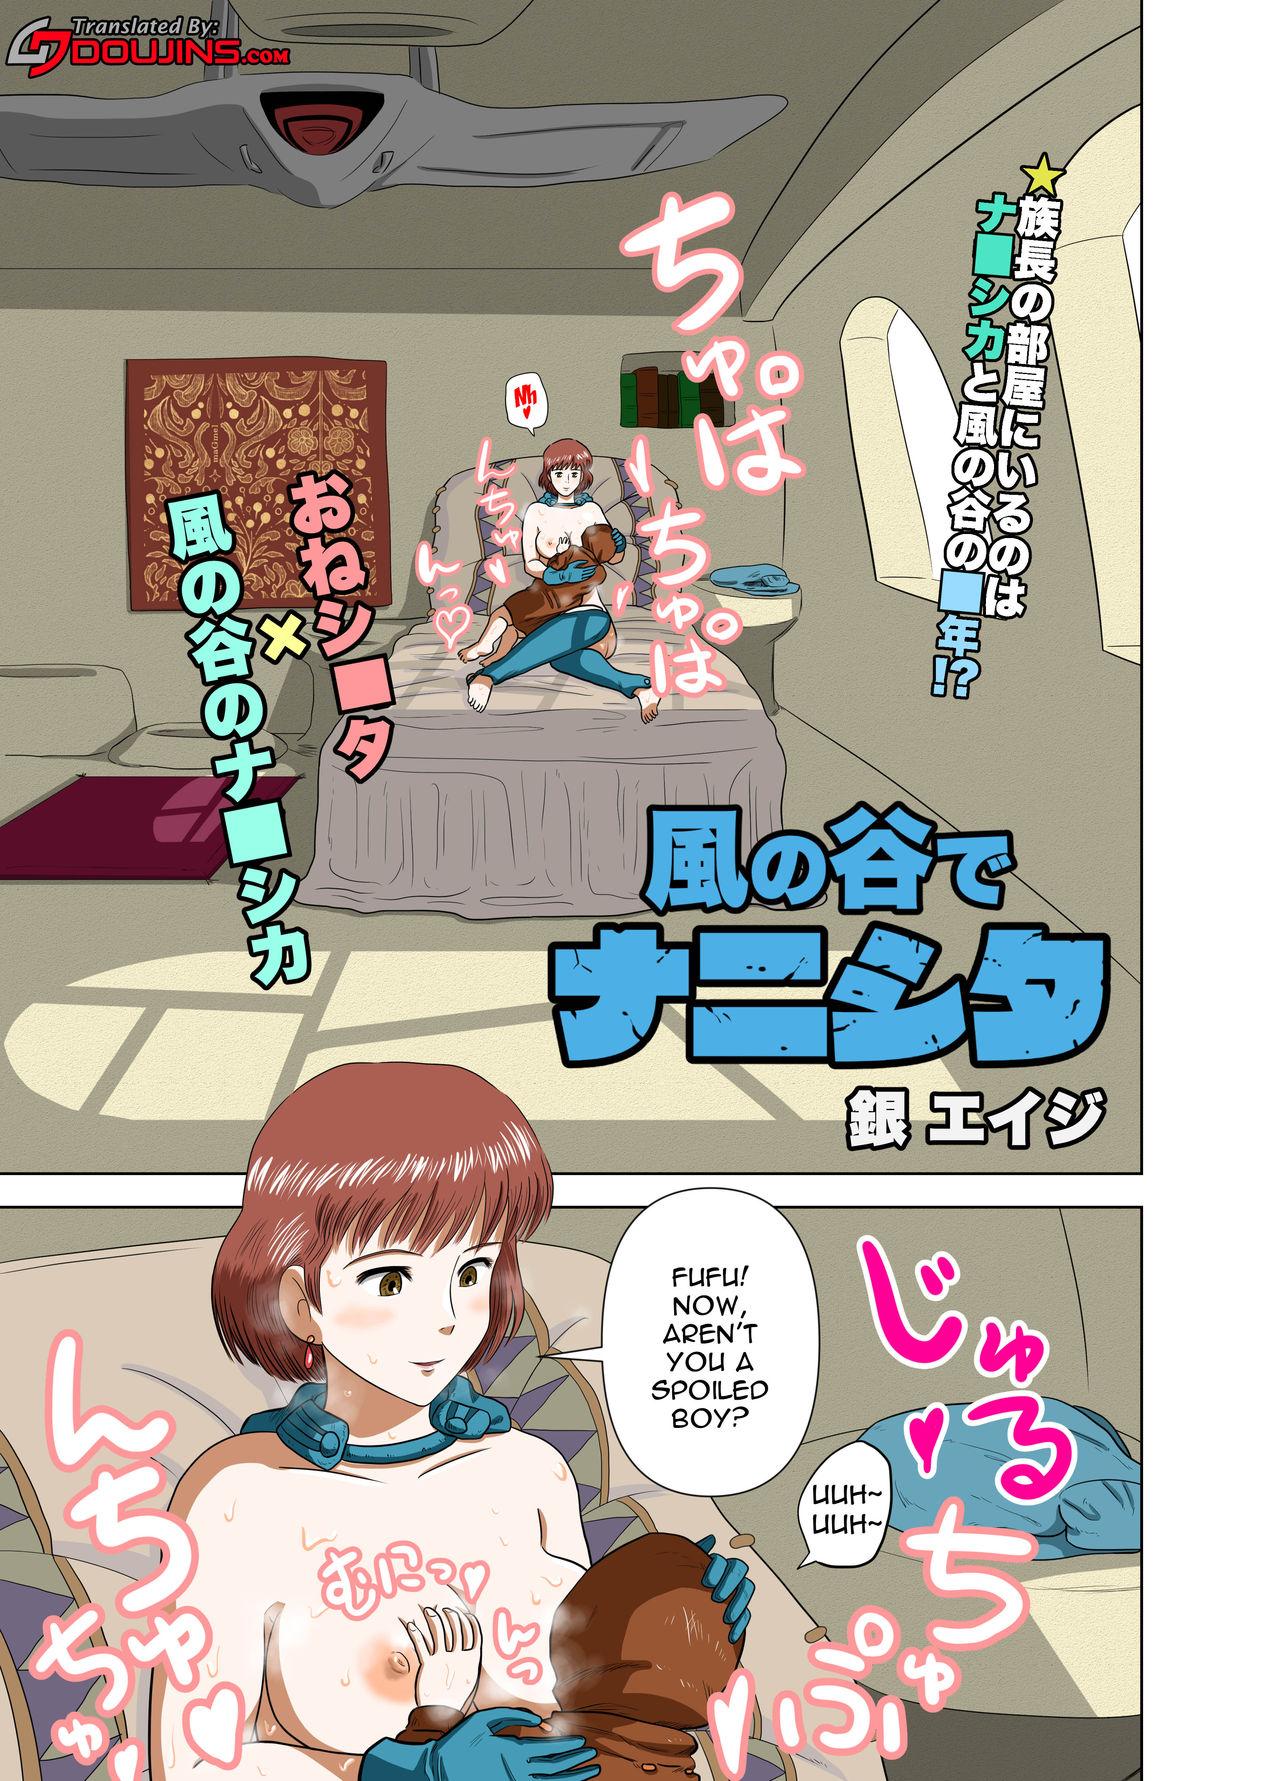 Hidden Cam Kaze no Tani de Nanishita | Getting Lewd In The Valley Of The Wind - Nausicaa of the valley of the wind | kaze no tani no nausicaa Kitchen - Page 2